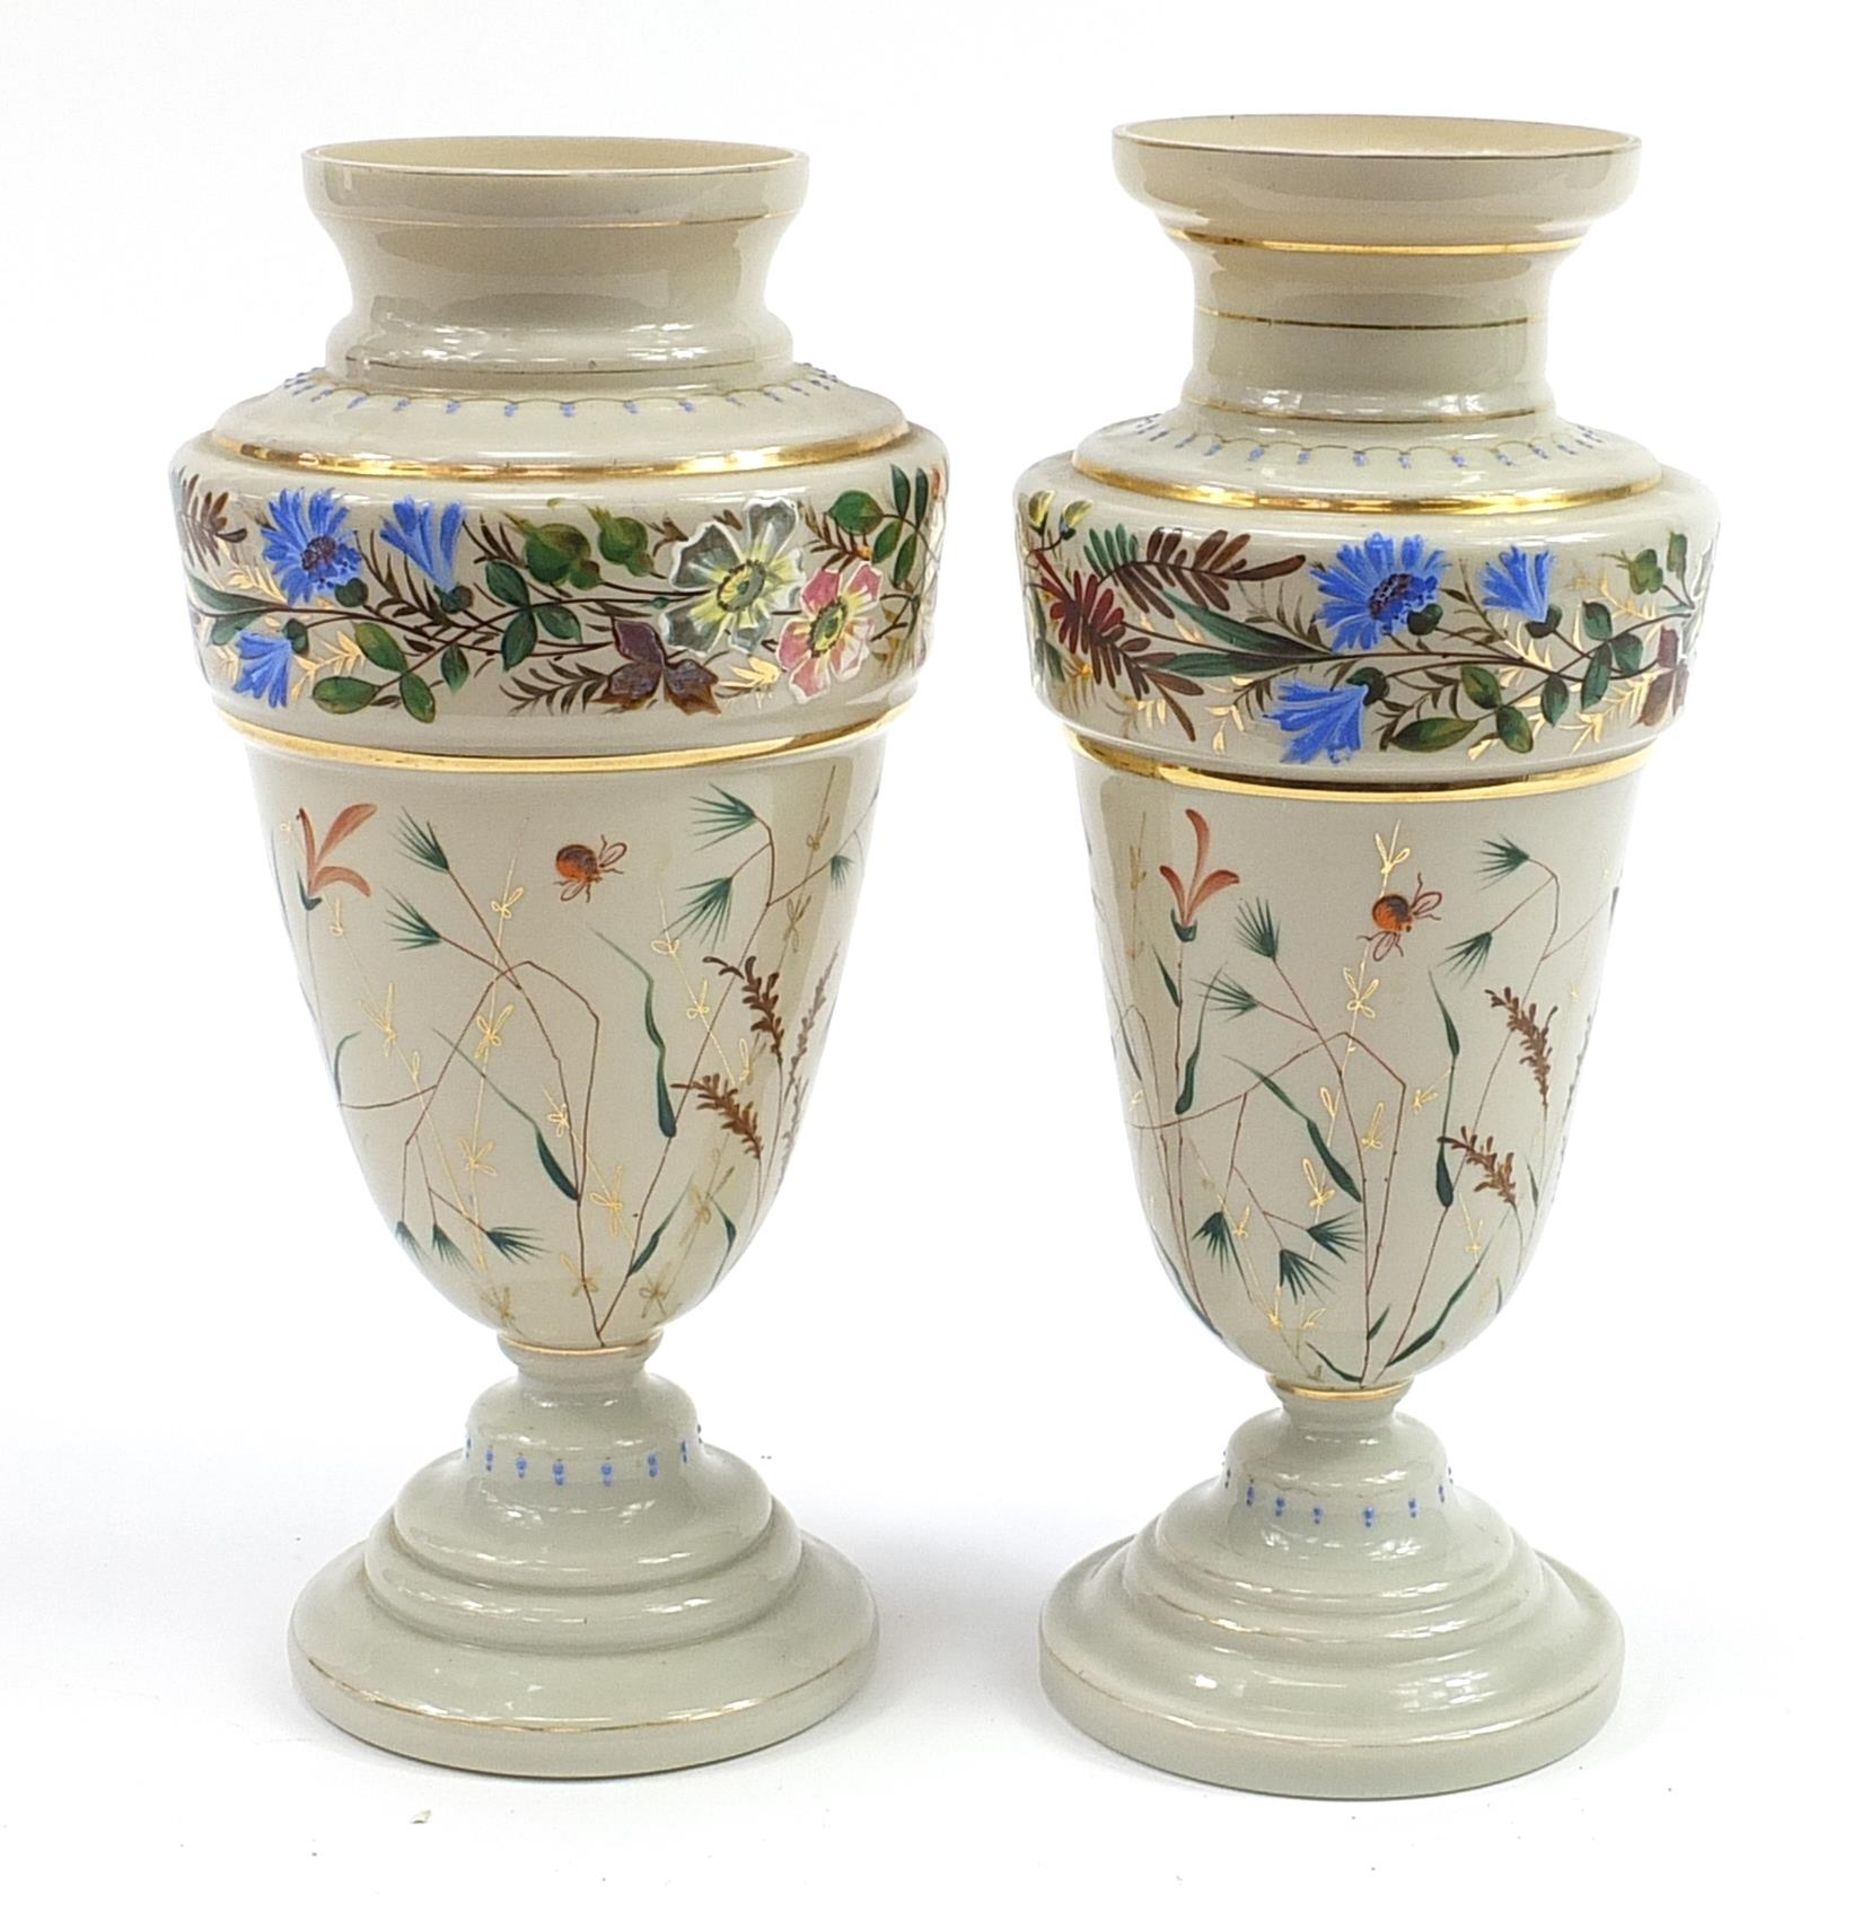 Matched pair of 19th century opaline glass vases, hand painted with flowers and insects amongst - Image 3 of 11